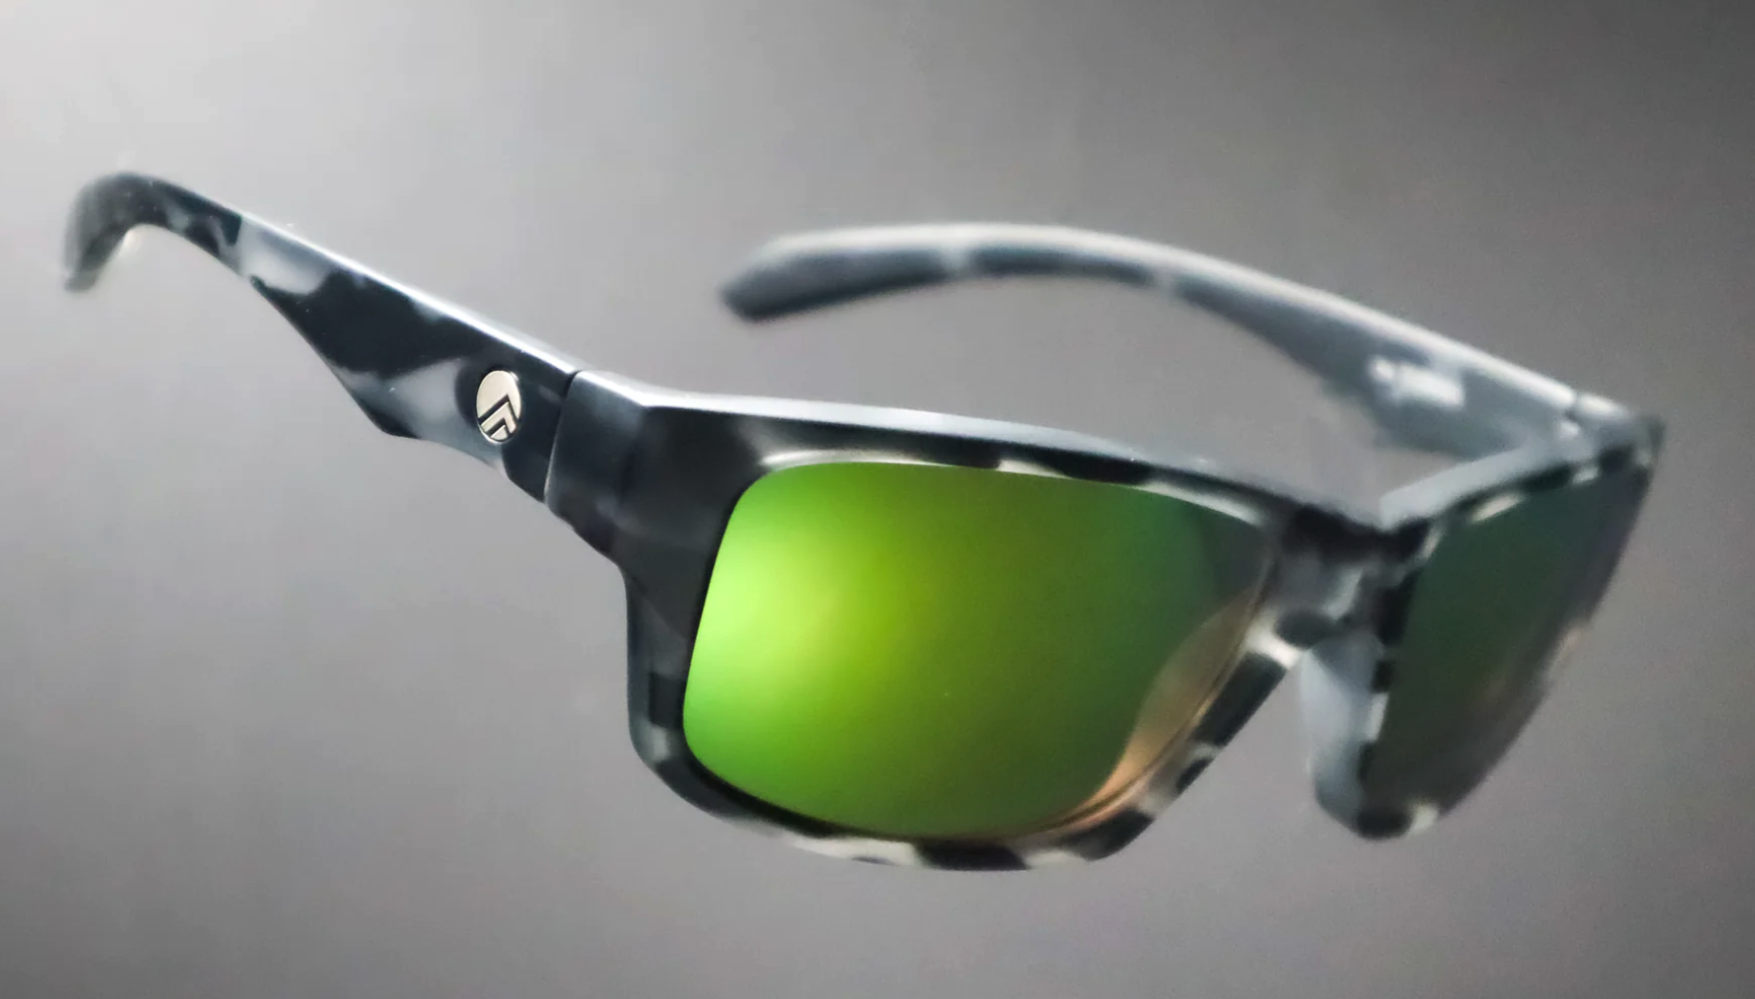 Breakline Oversoul Polarized Sunglasses feature high performance Trivex lens for the best in fishing sunglasses.